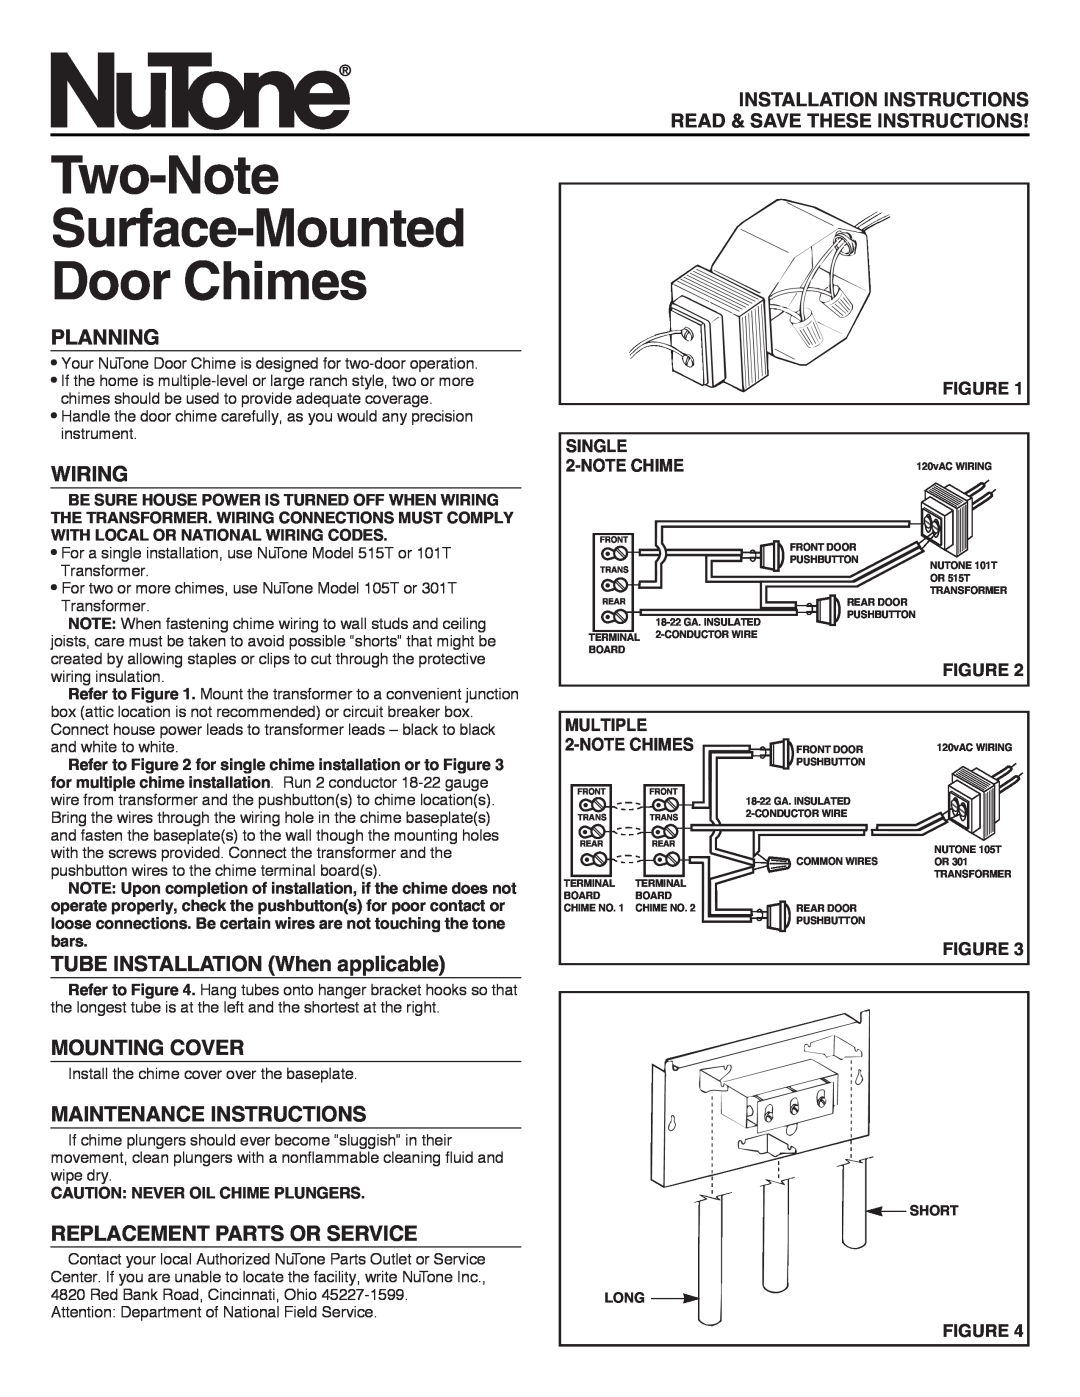 NuTone 515T, 101T installation instructions Two-Note Surface-Mounted Door Chimes, Planning, Wiring, Mounting Cover, Single 